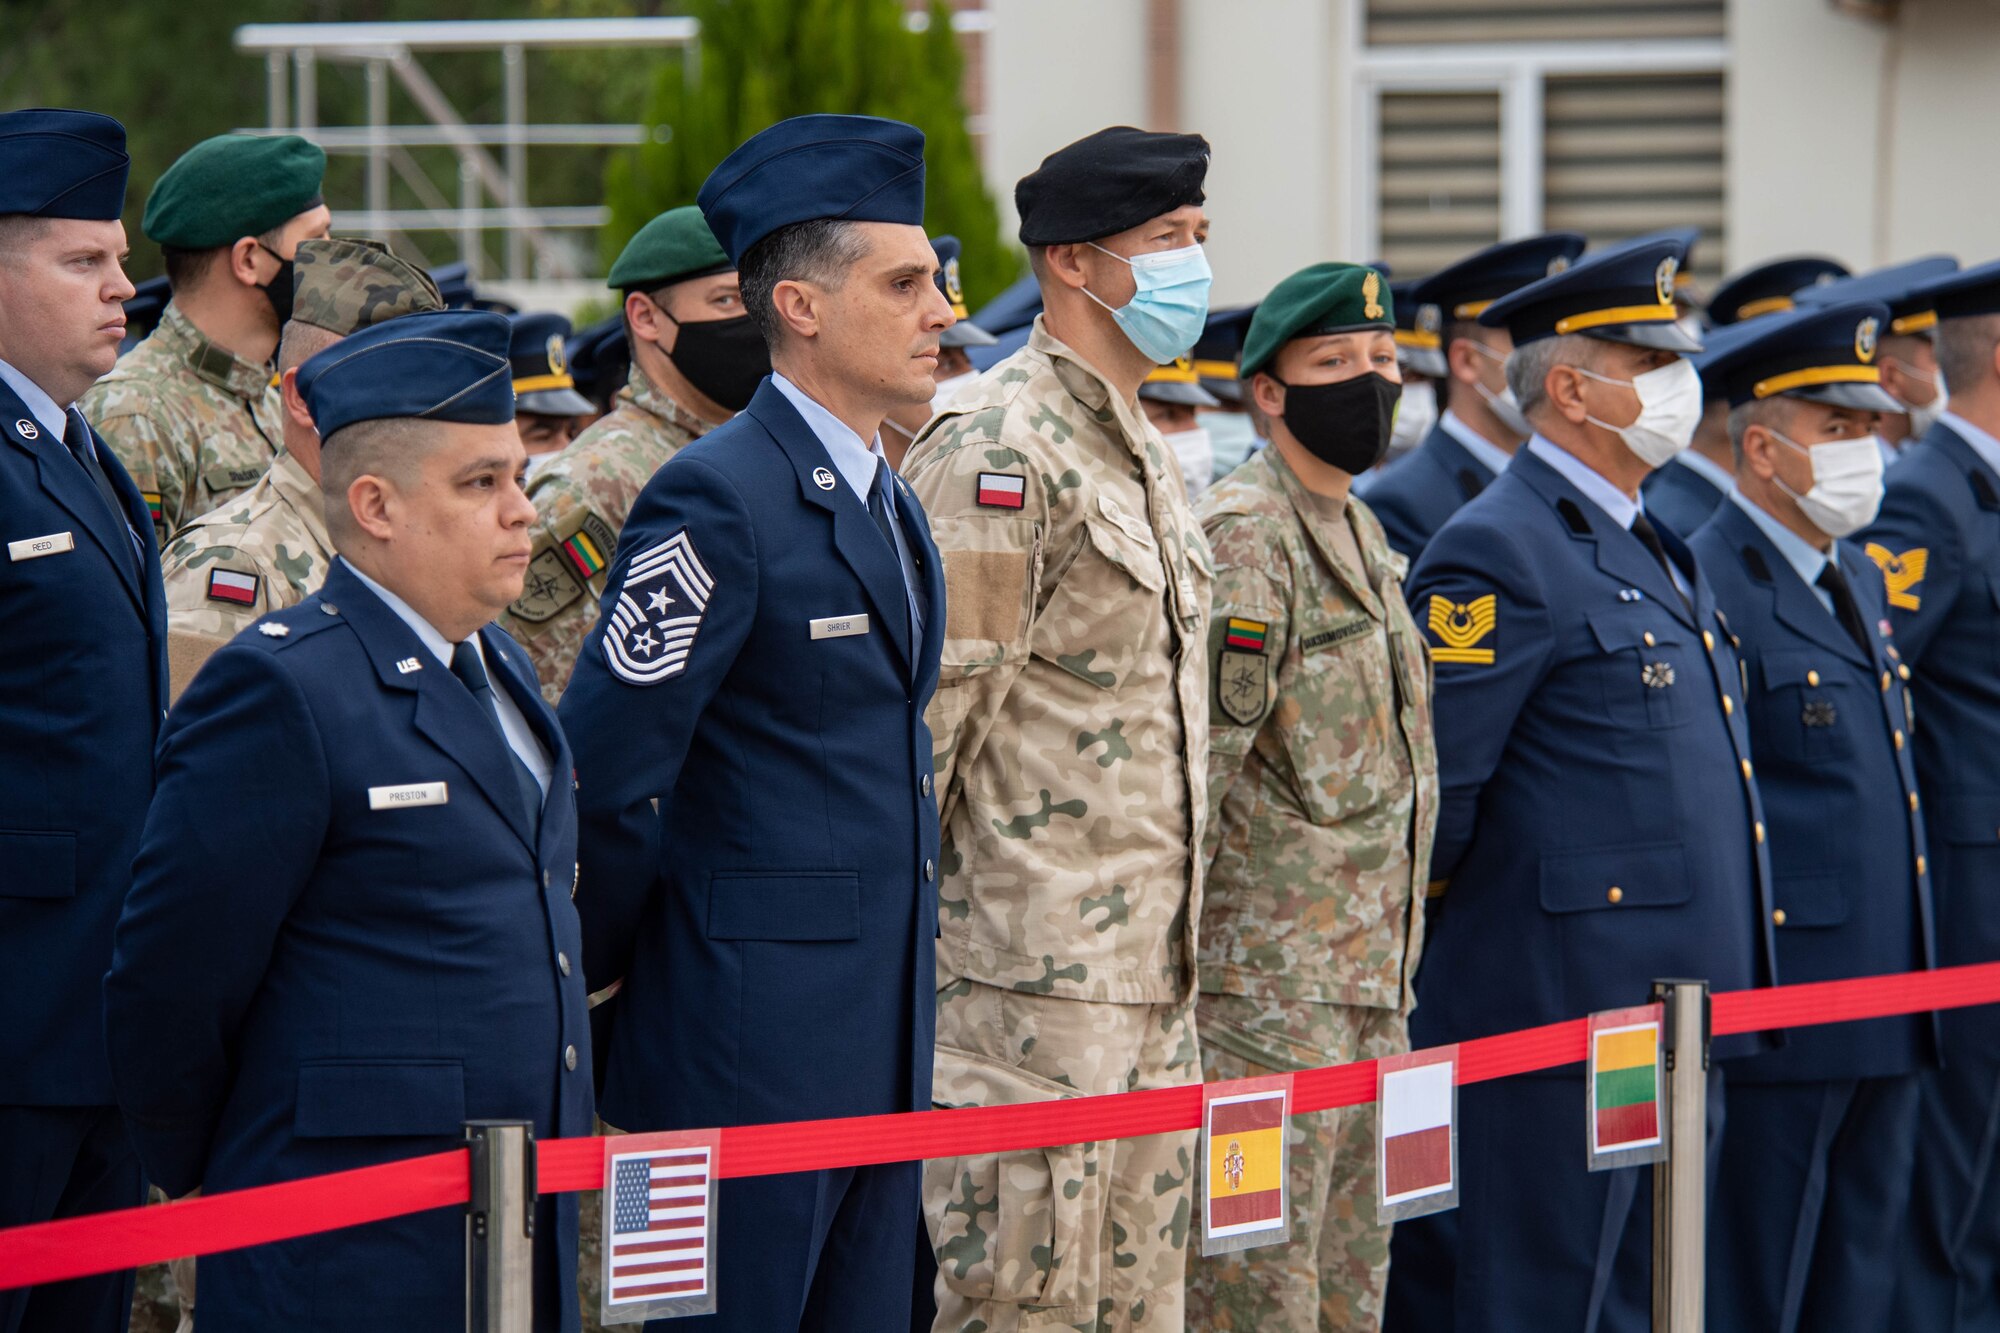 U.S. Air Force, Polish, Lithuanian and Turkish Air Force participate in Atatürk Memorial Day ceremony